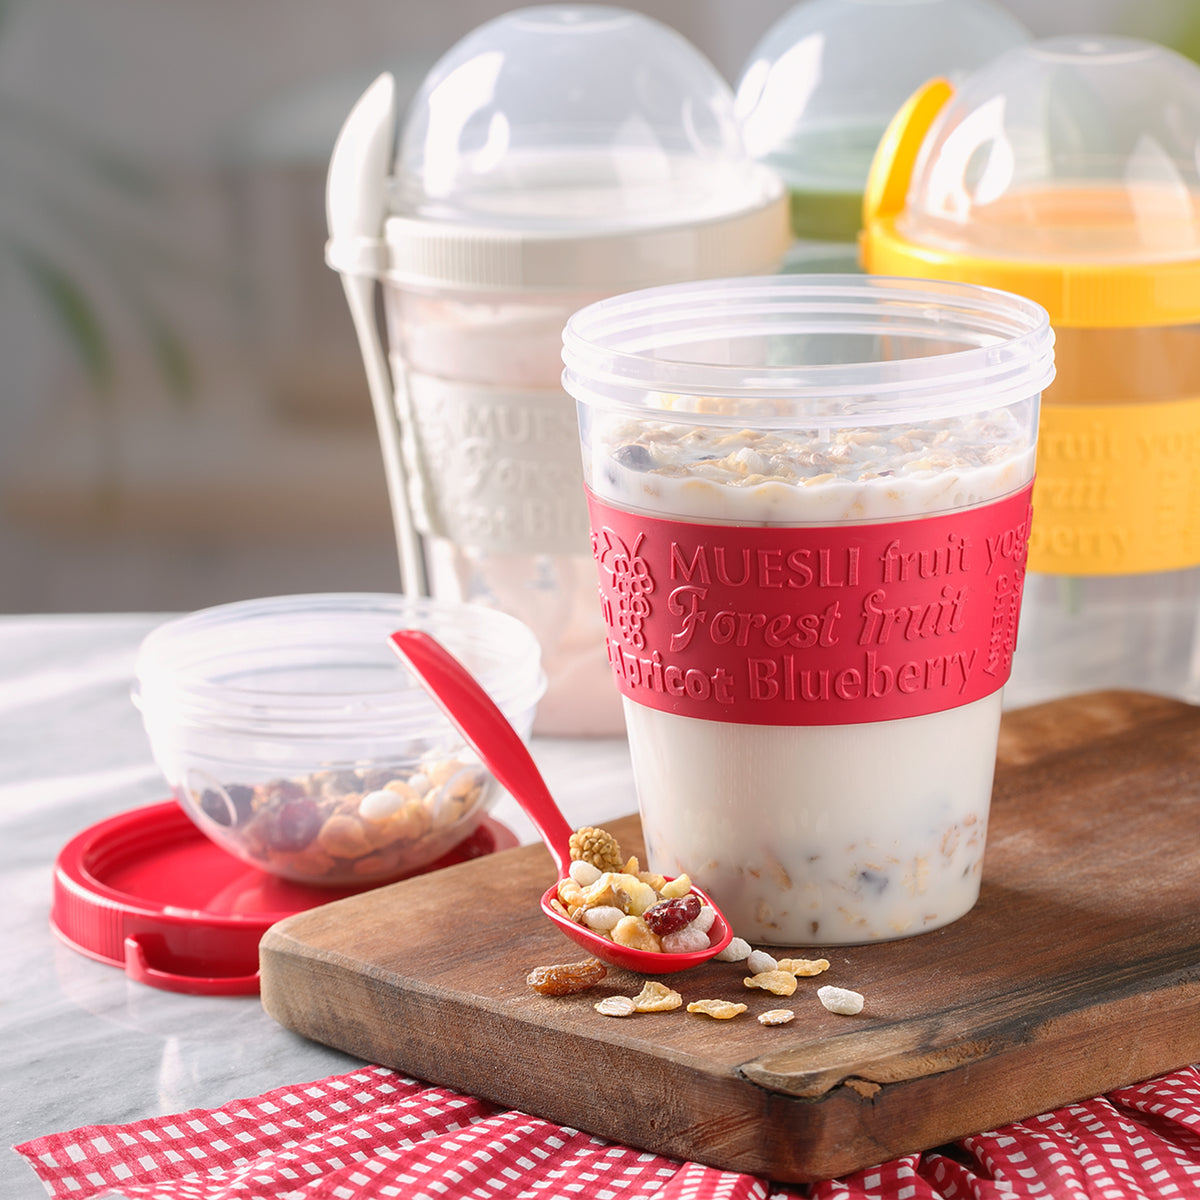 Salad Meal Shaker Cup Fresh Salad Cup to Go,Portable Fruit and Vegetable  Salad Cups Container with Fork & Salad Dressing Holder (L)